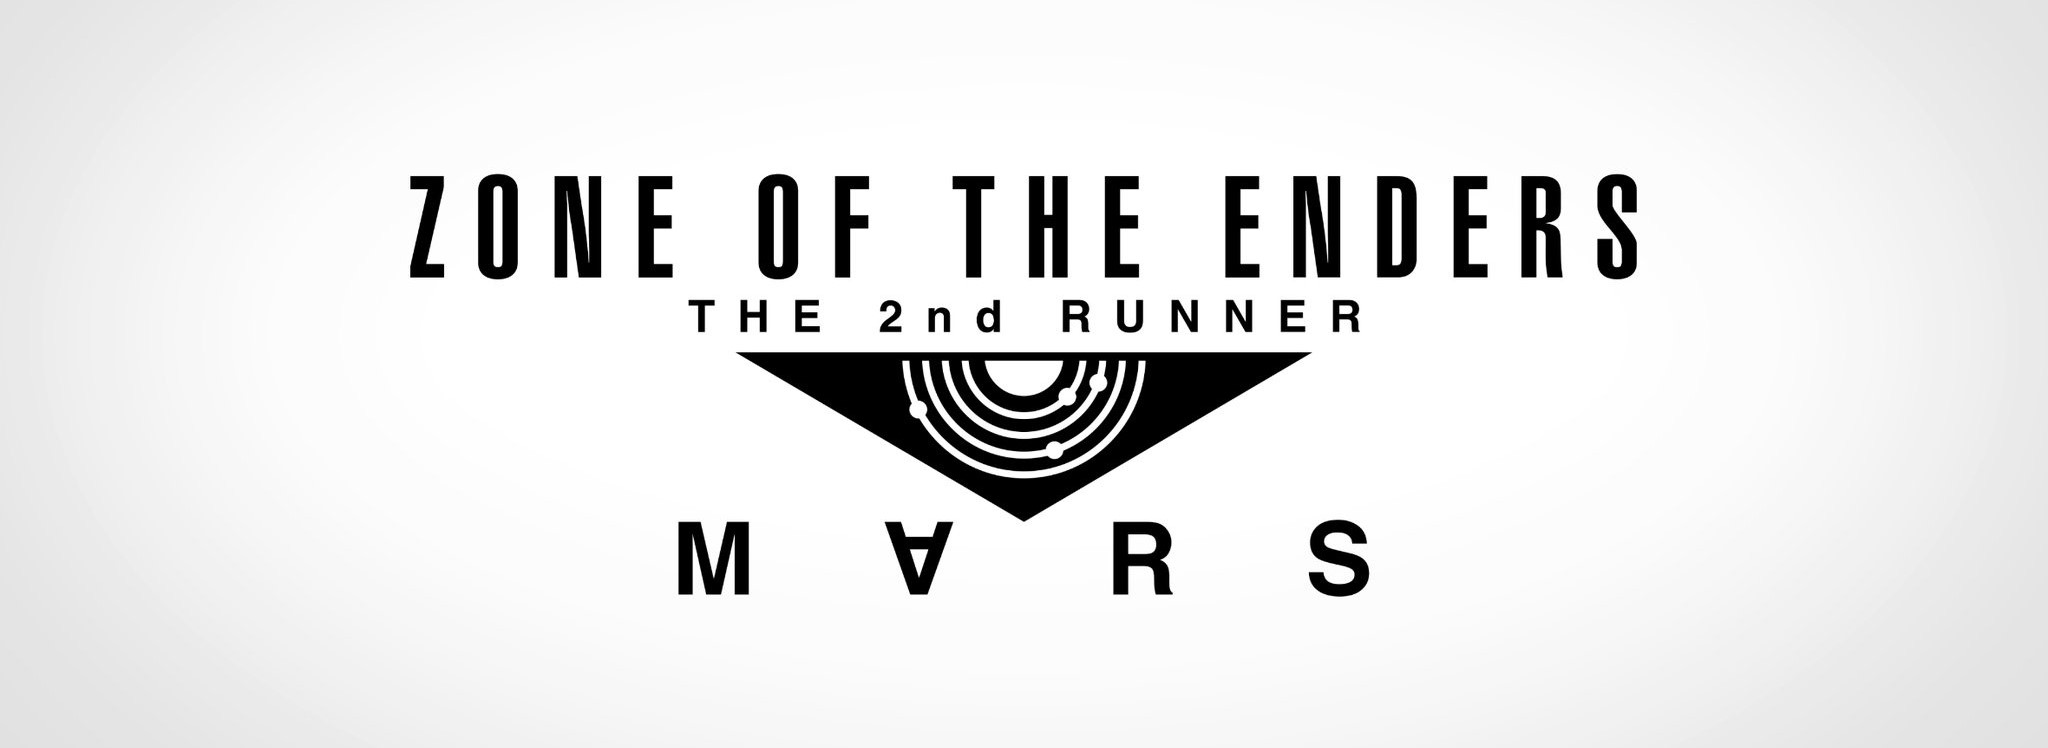 ﻿Zone of the Enders: The 2nd Runner - MARS